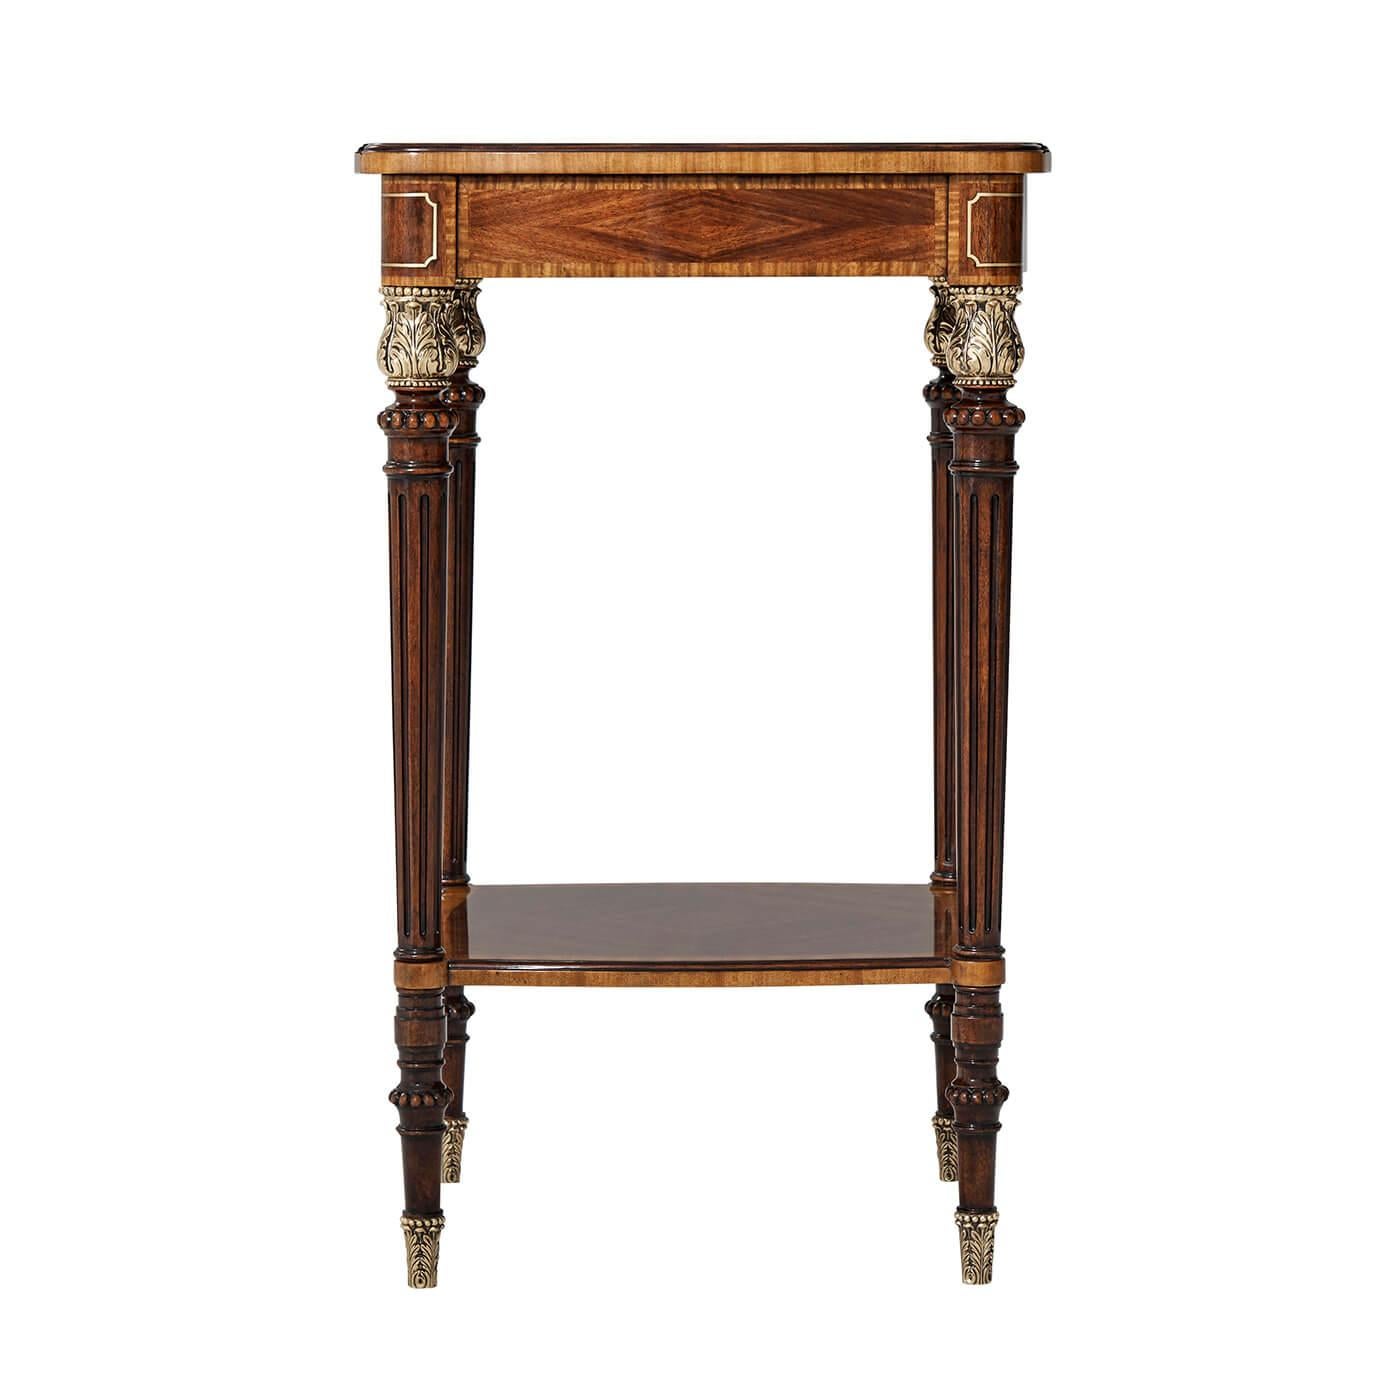 English Regency style mahogany and exotic wood veneer end table with brass line inlaid details on turned gilded acanthus capital supports with fluting and a shelf stretcher base.

Dimensions: 18